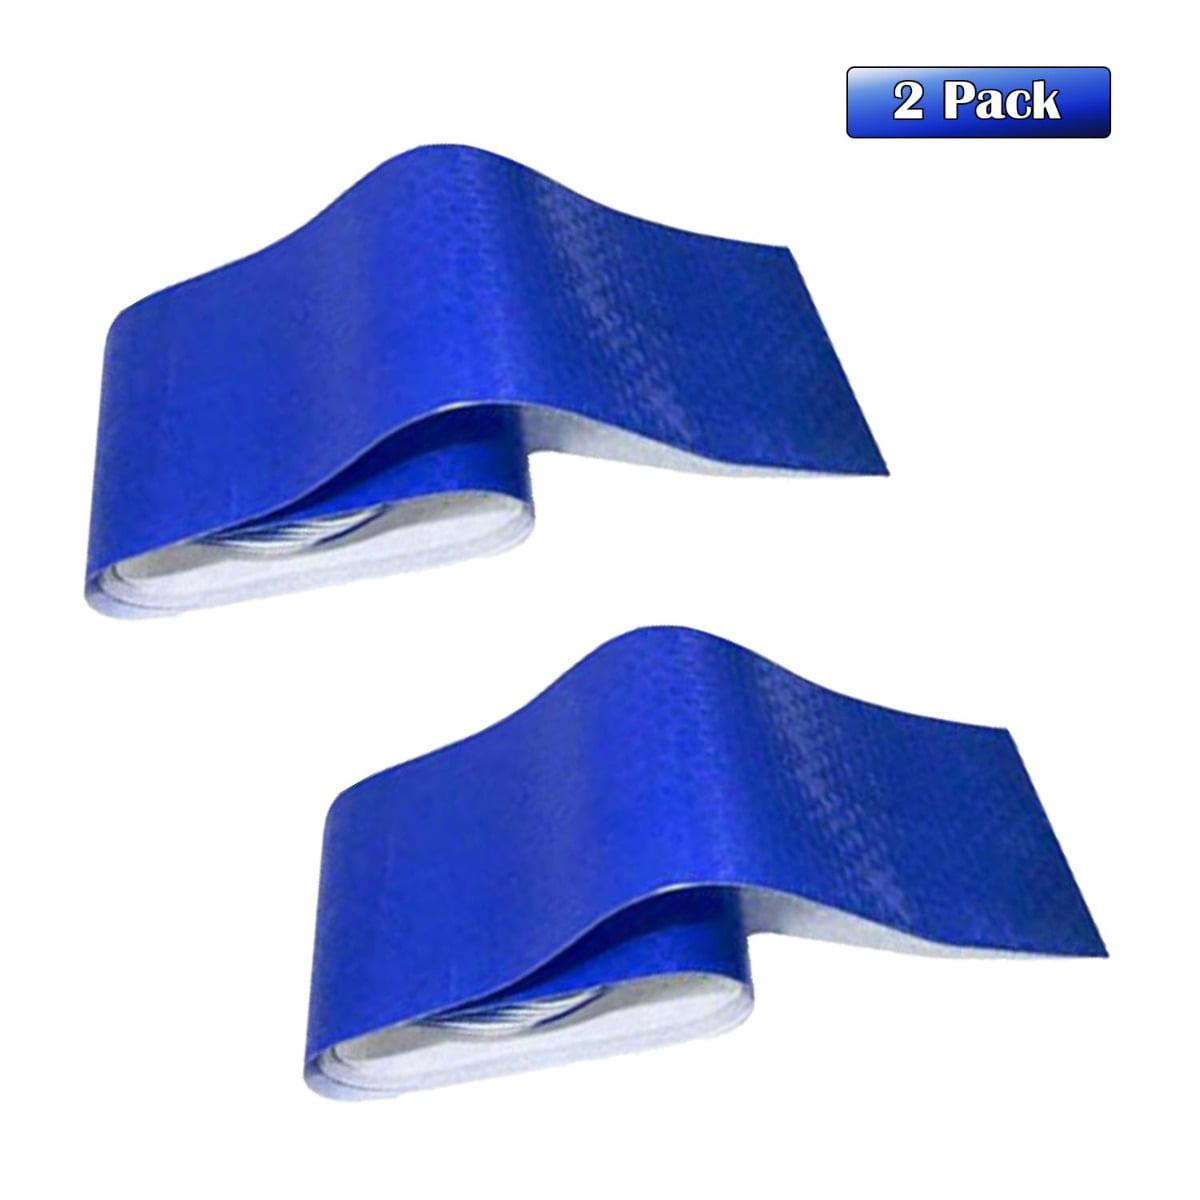 2 Pack Heavy Duty Extra Wide Poly Tarp Tape 3" wide x 108' by BAC Industries 